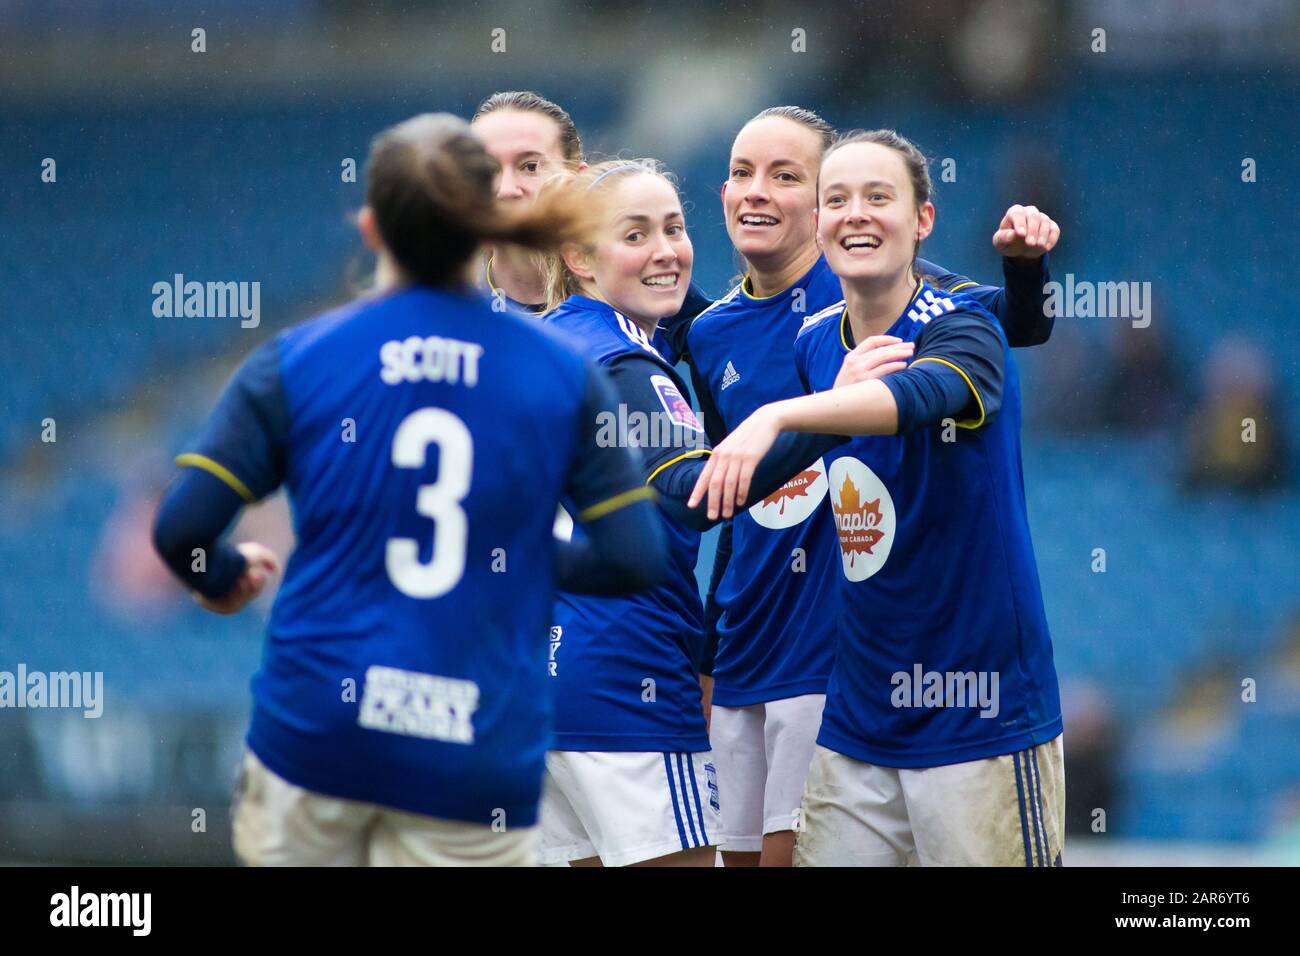 Chesterfield, UK. 26th Jan, 2020. Women's FA Cup Fourth Round: Birmingham City beat Sheffield United 3 - 0. Scorer Harriet Scott is congartulated by team-mates. Credit: Peter Lopeman/Alamy Live News Stock Photo